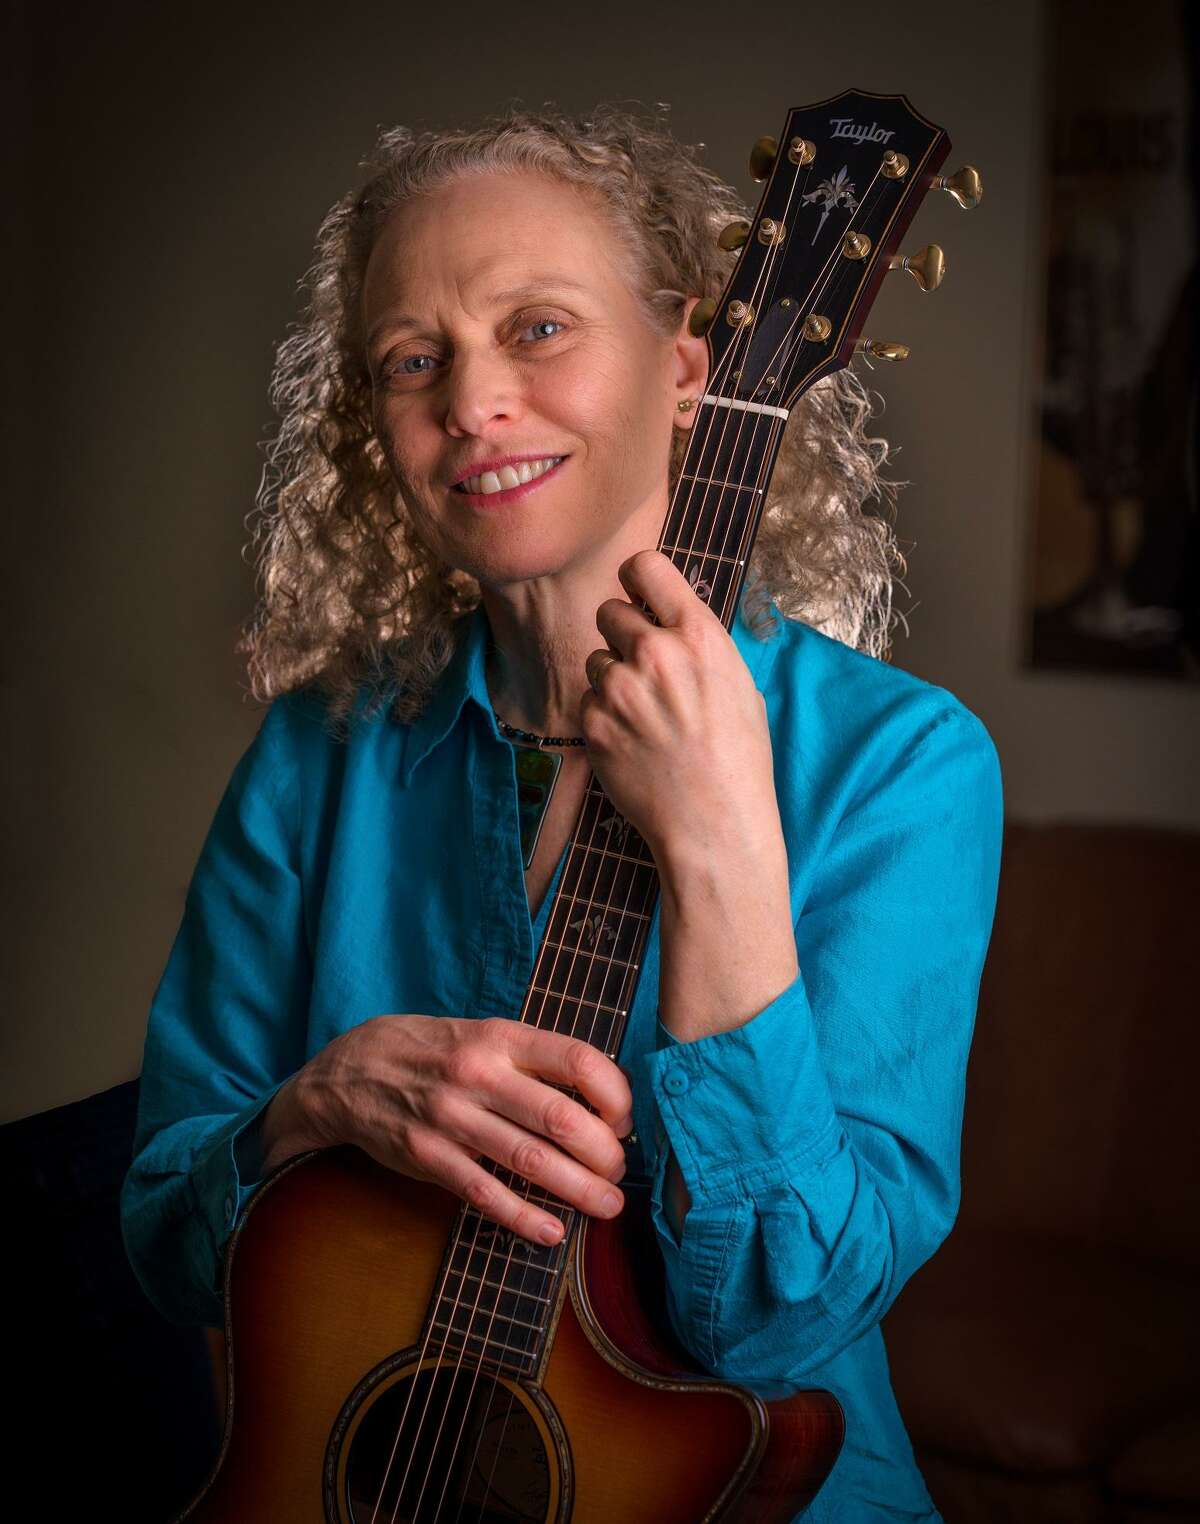 Wilton Library’s Hot & Cool: Jazz at the Brubeck Room concert welcomes the Mimi Fox Duo with jazz guitarist Mimi Fox and bassist Mike Asetta at 4 p.m. on Sunday, April 15.